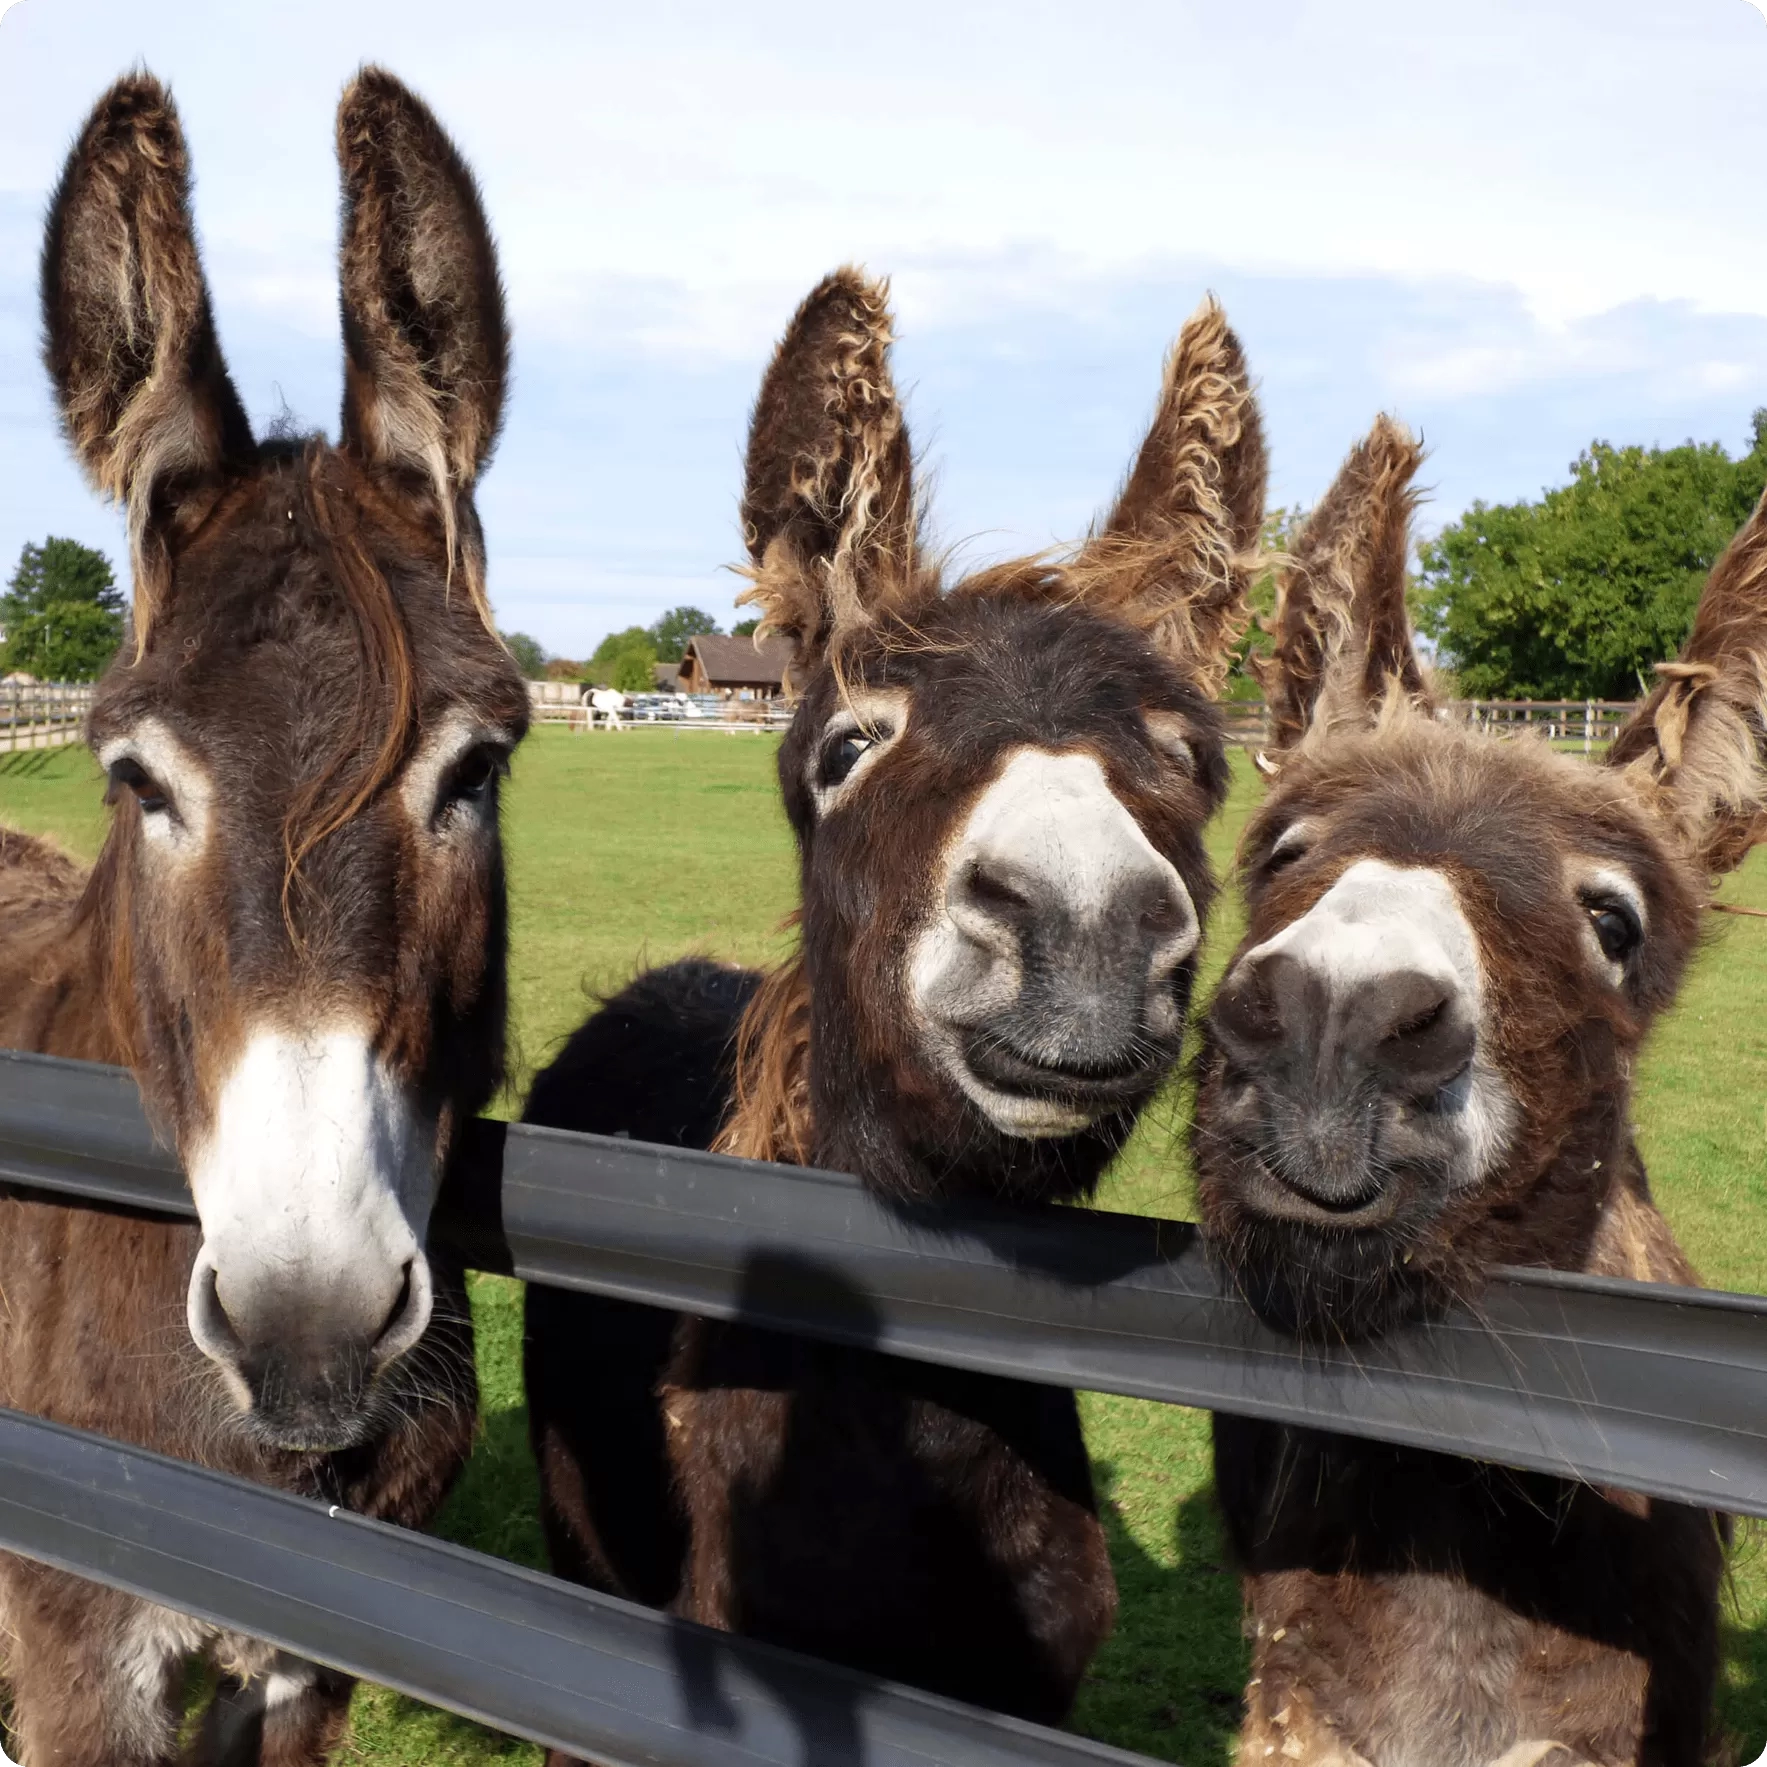 Three donkeys looking over the fence